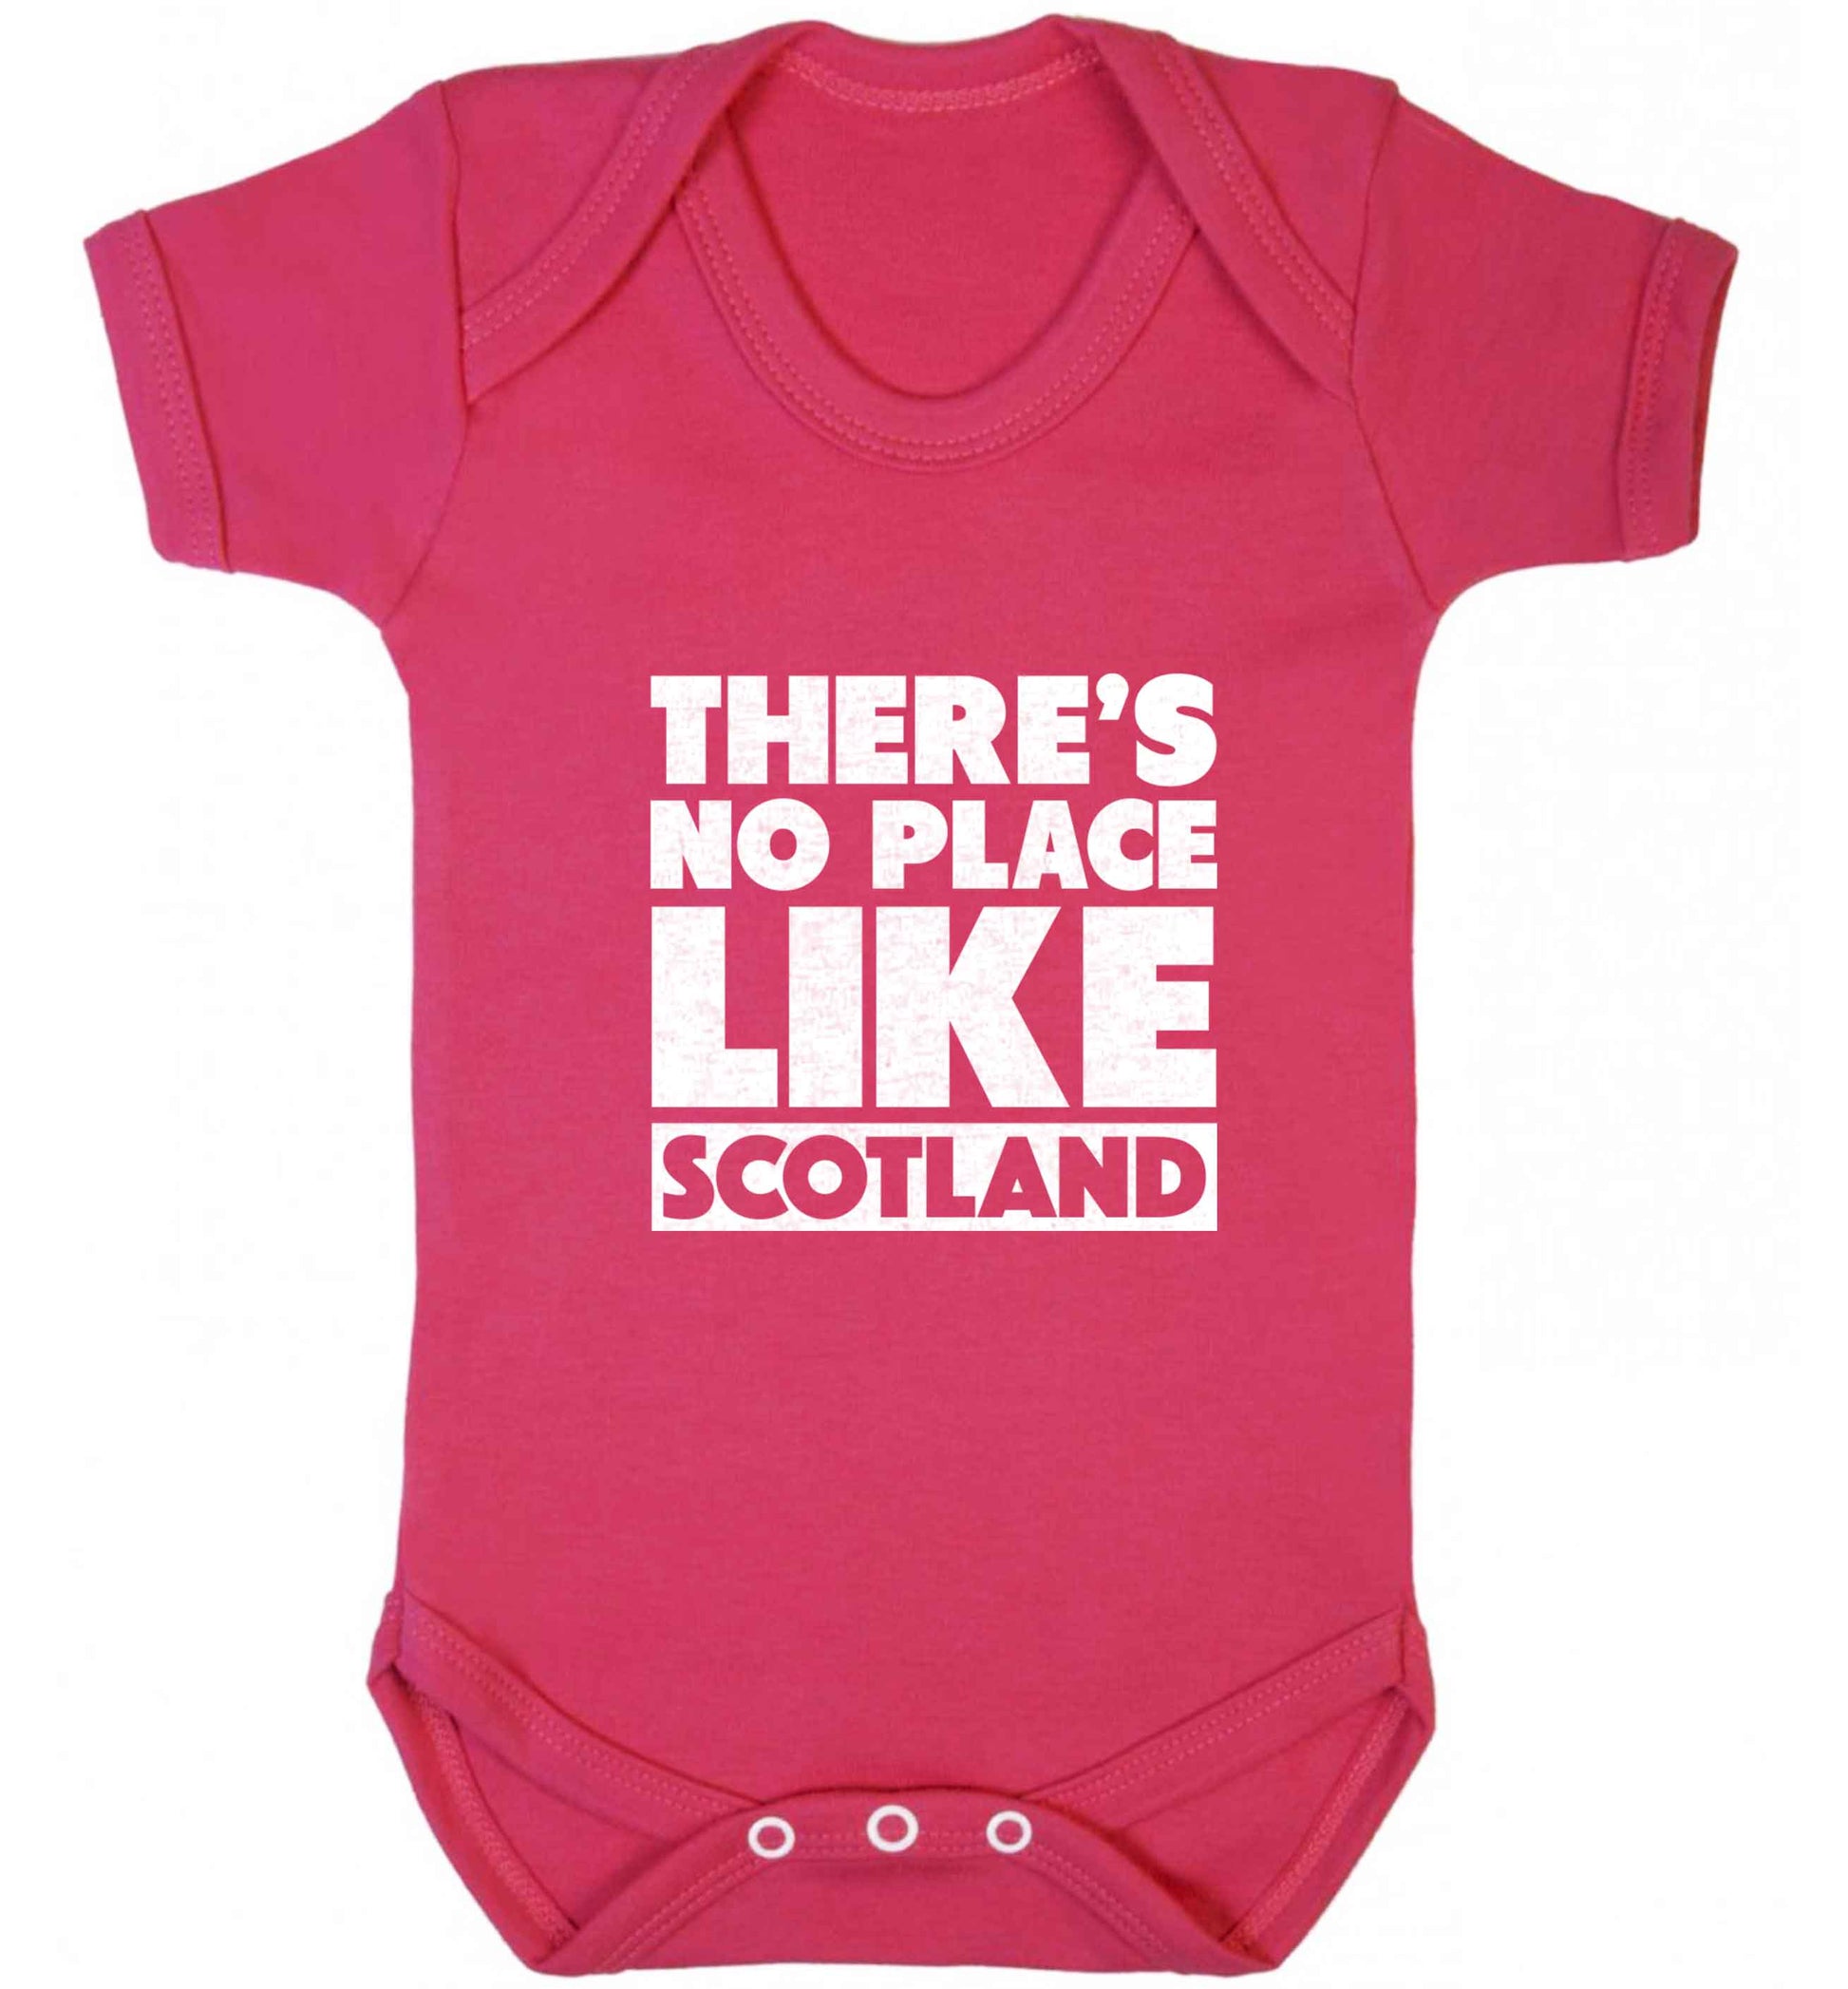 There's no place like Scotland baby vest dark pink 18-24 months